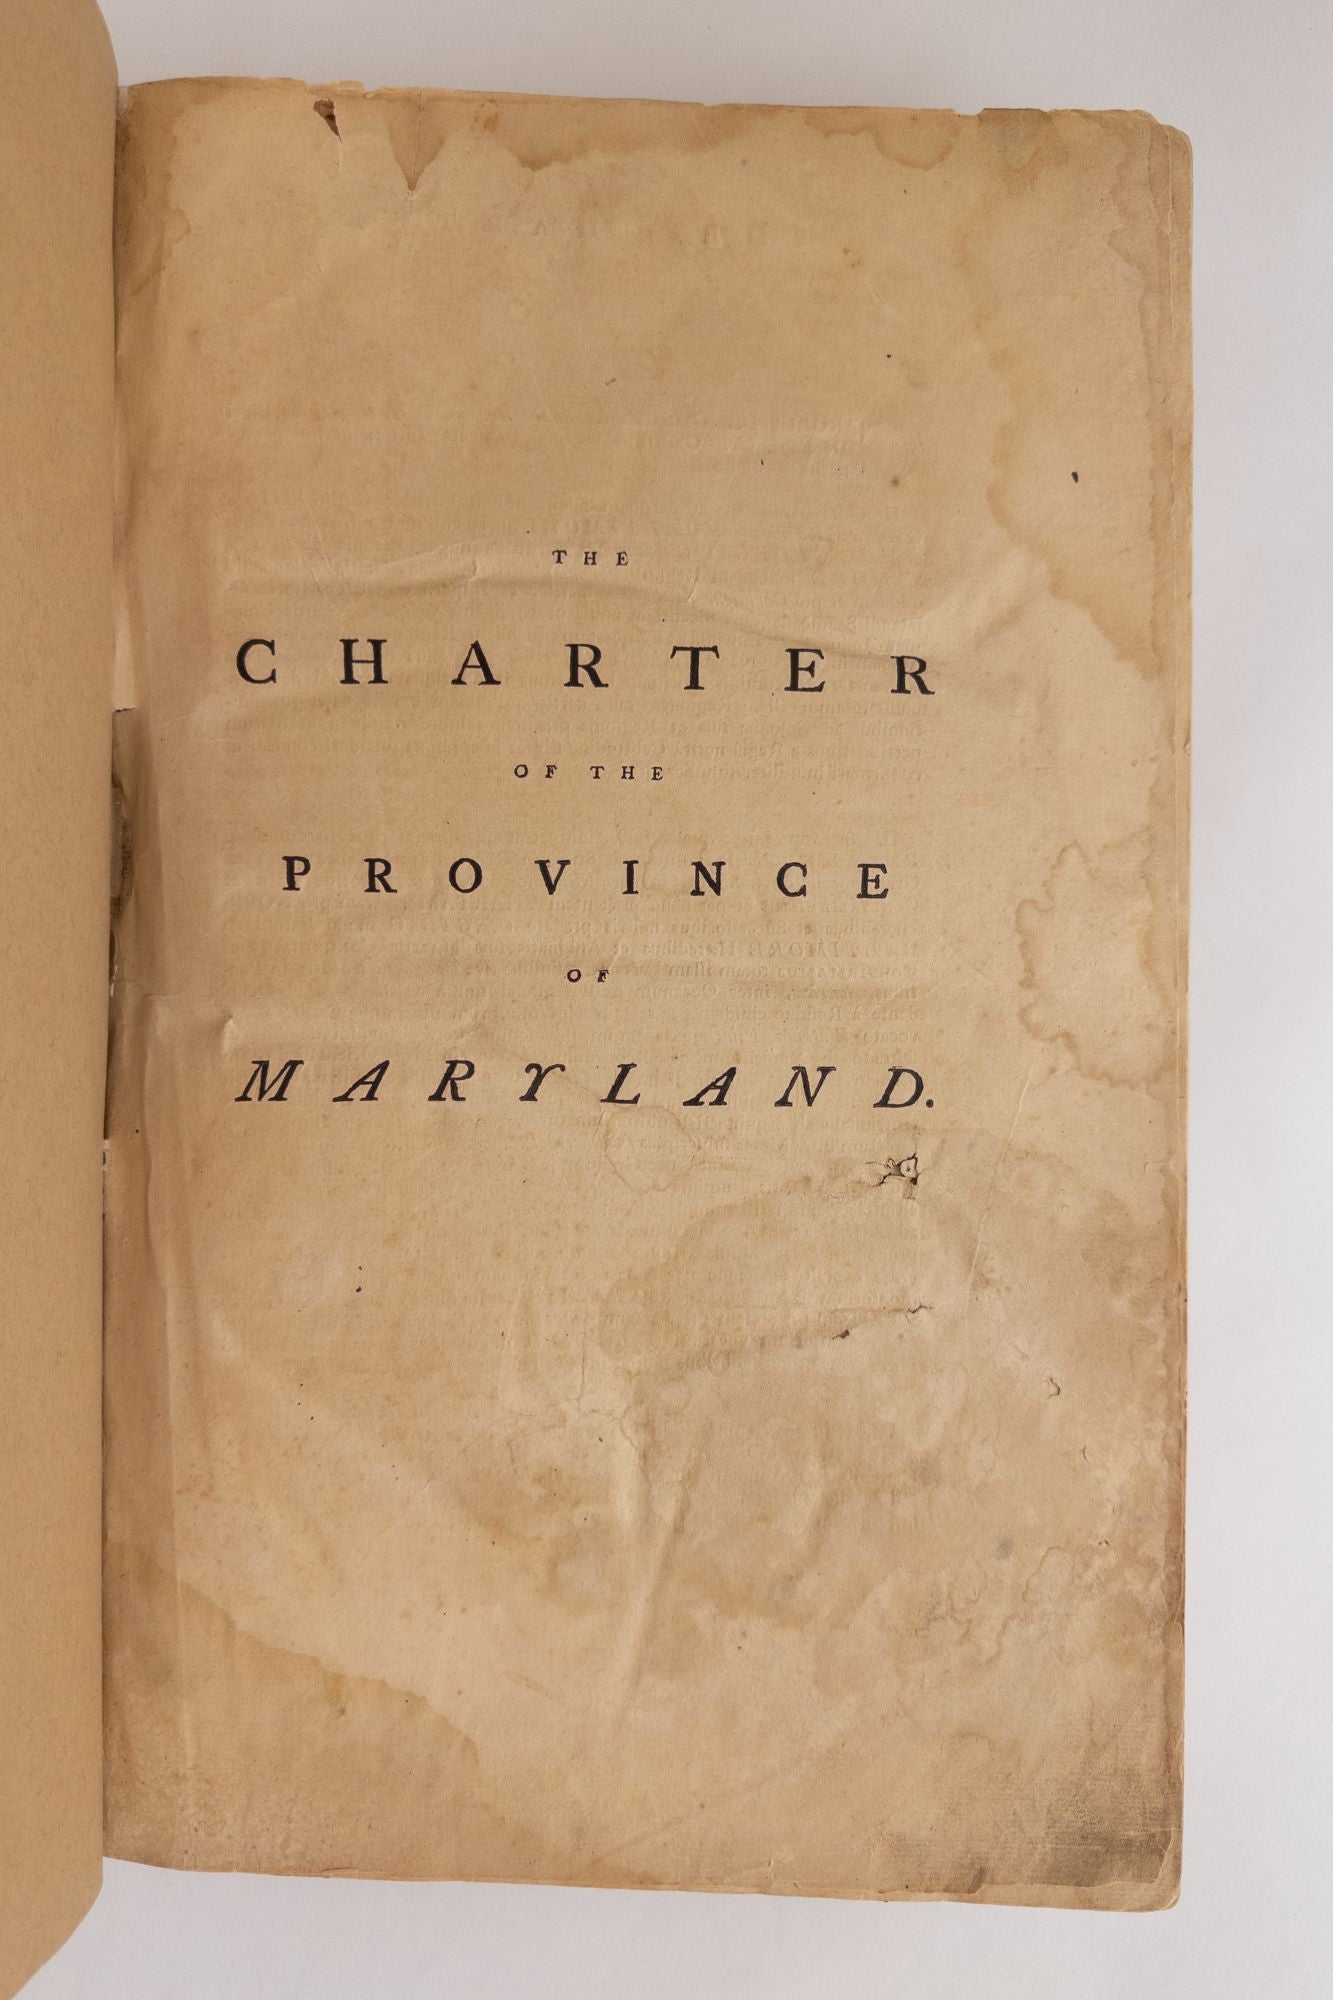 Product Image for LAWS OF MARYLAND AT LARGE, WITH PROPER INDEXES : NOW FIRST COLLECTED INTO ONE COMPLEAT BODY, AND PUBLISHED FROM THE ORIGINAL ACTS AND RECORDS, REMAINING IN THE SECRETARY'S-OFFICE OF THE SAID PROVINCE : TOGETHER WITH NOTES AND OTHER MATTERS, RELATIVE TO TH